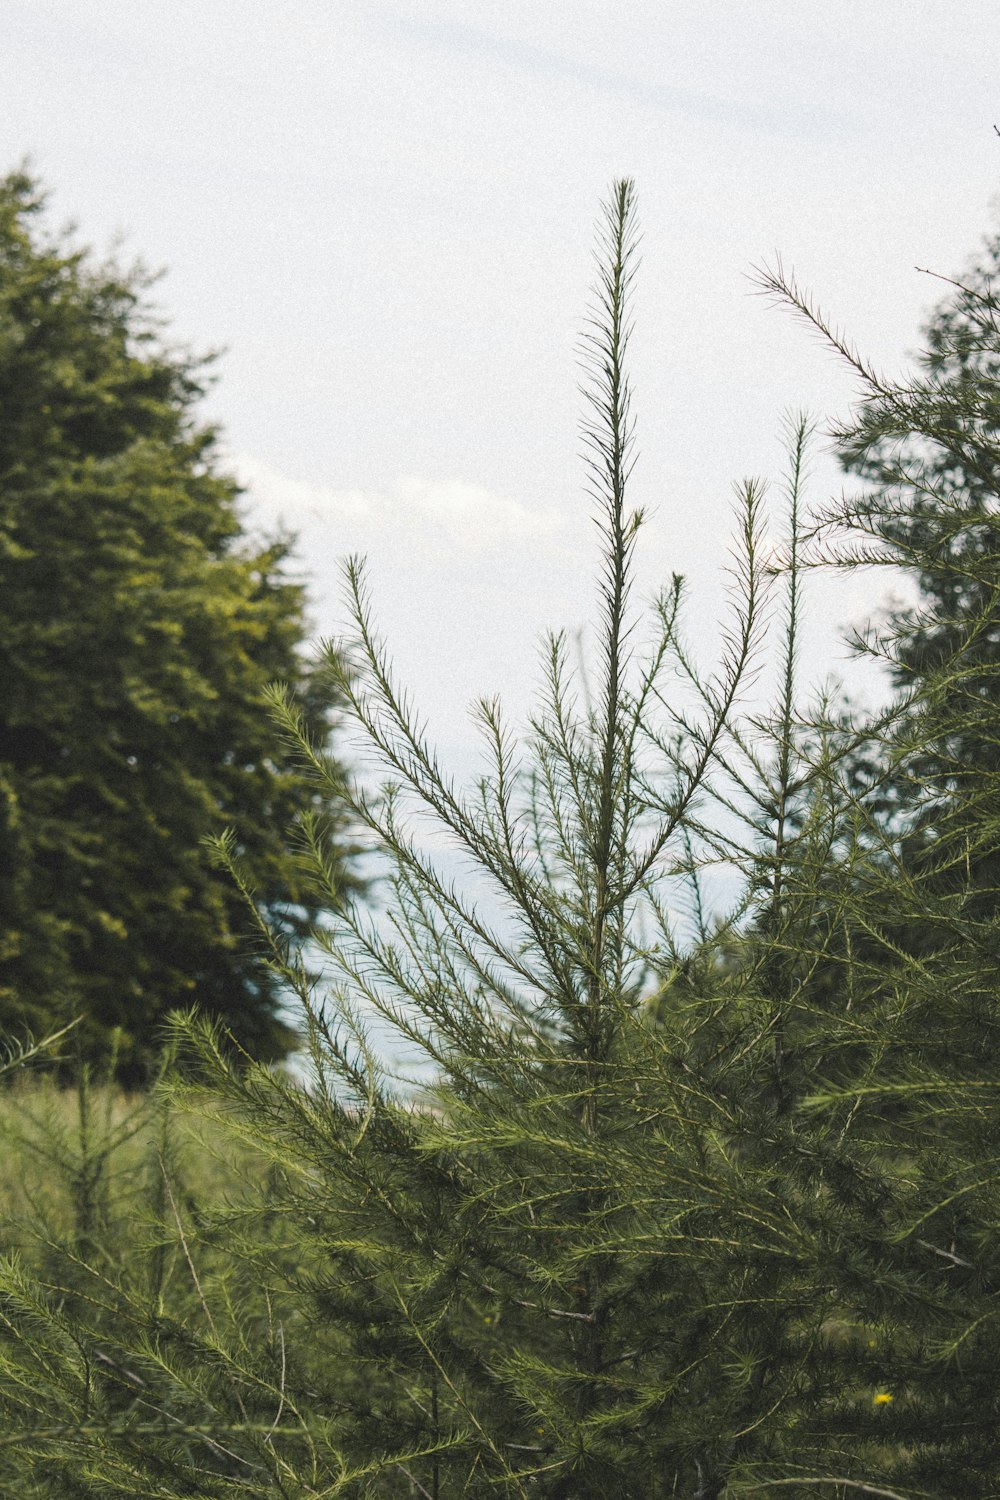 a bird perched on top of a pine tree